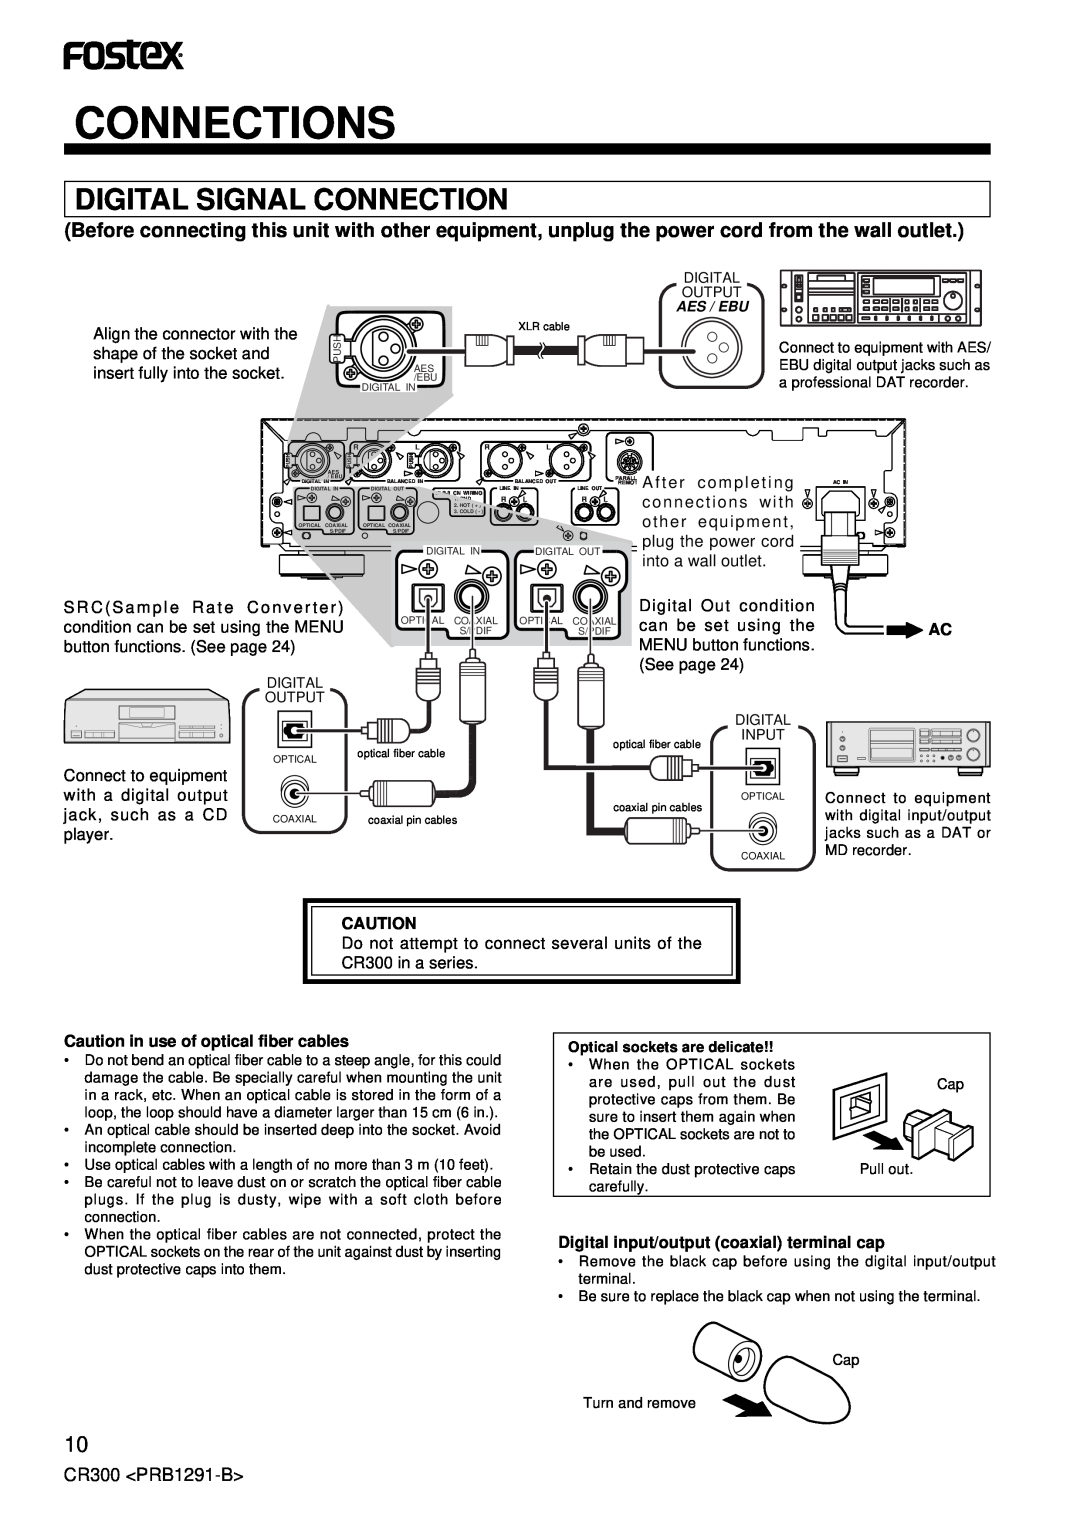 Fostex CR300 owner manual Connections, Digital Signal Connection 